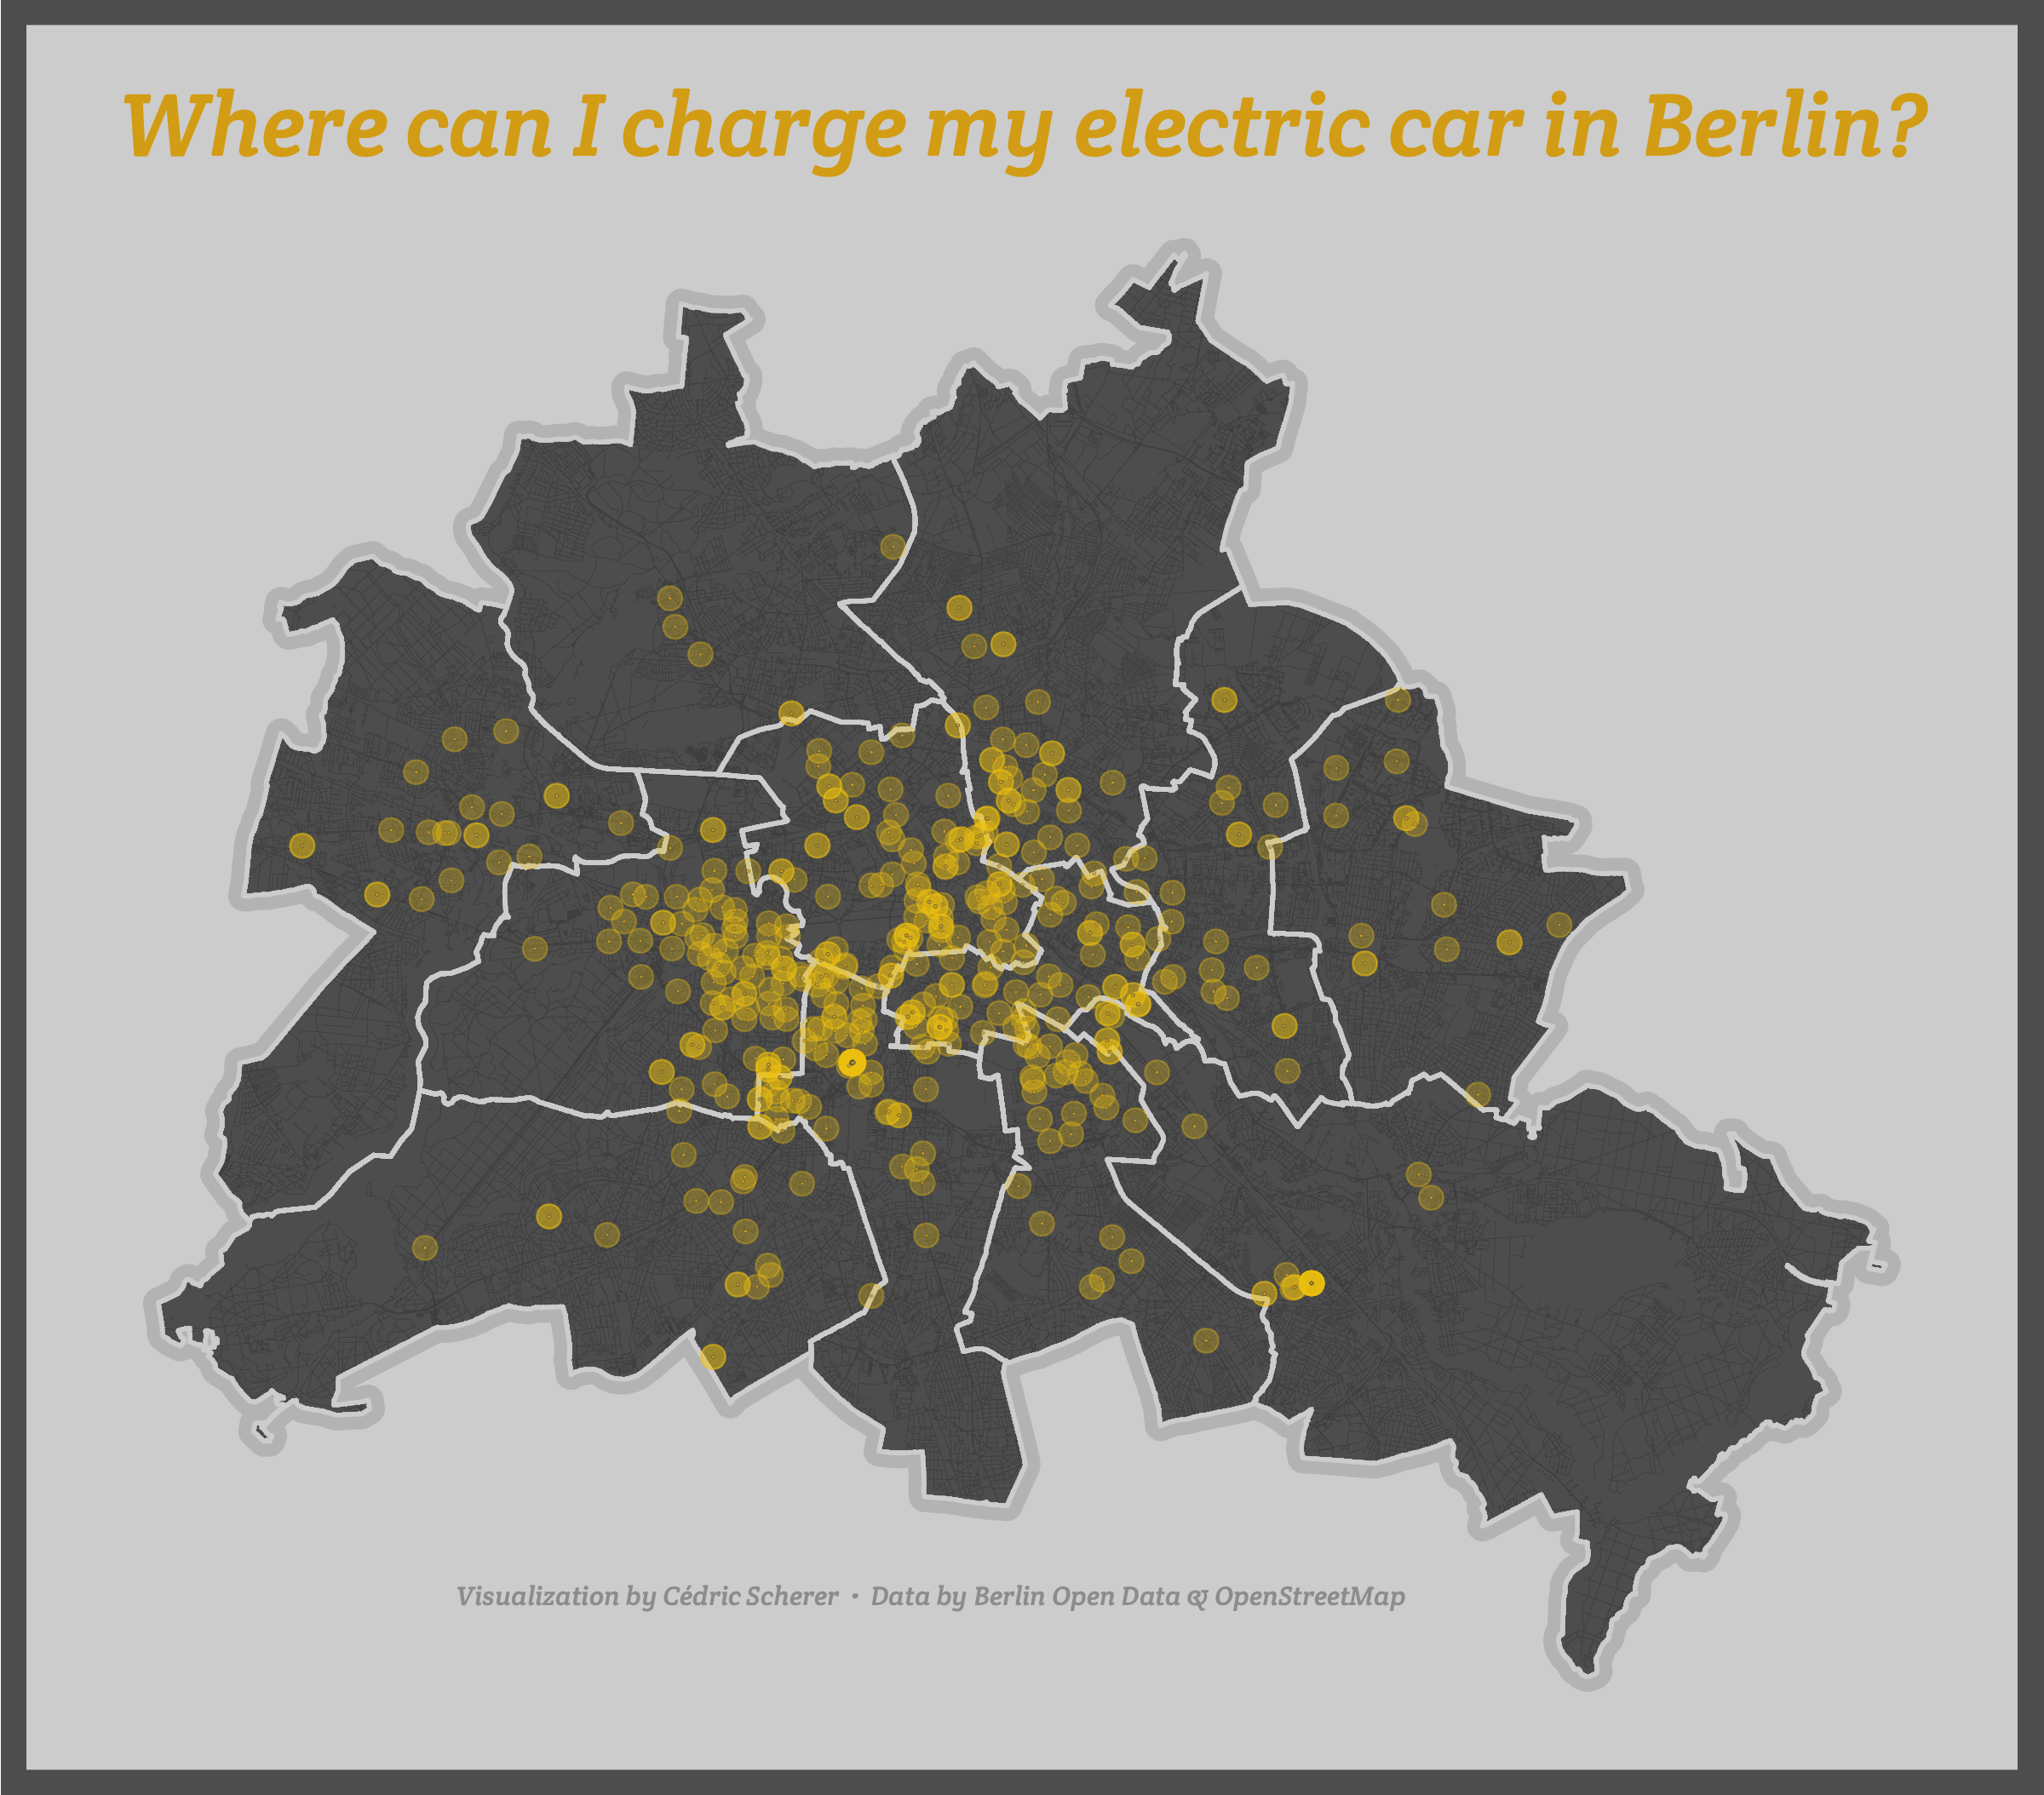 ./Day27_Resources/Resources_eMobilityBerlin.png